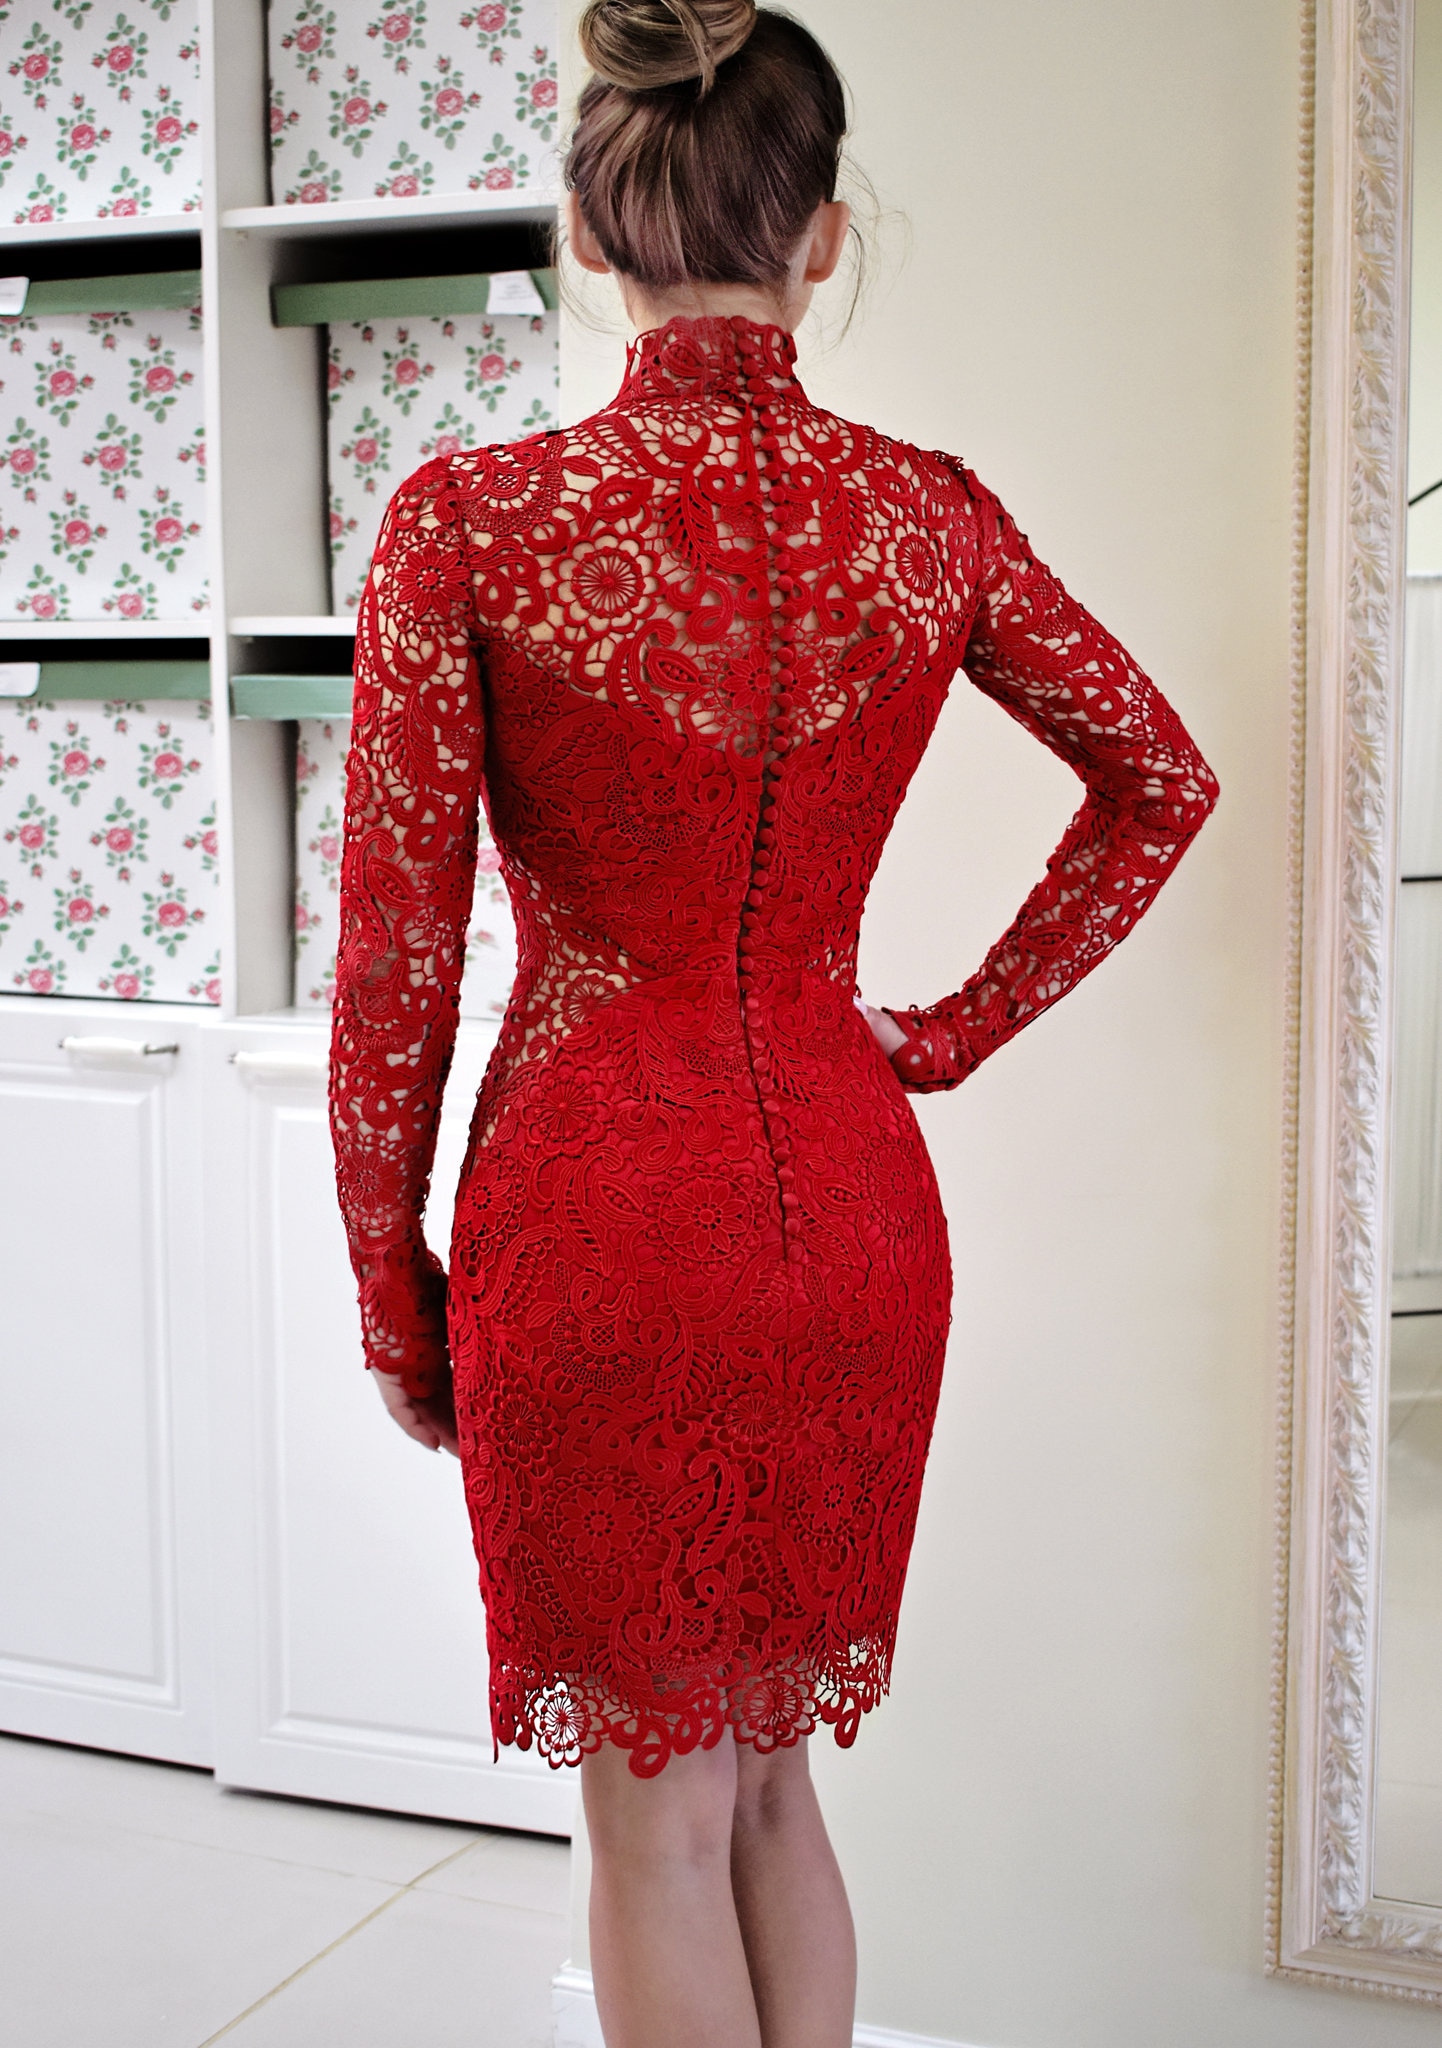 Red Lace Dress, Red Wedding Dress, Red Cocktail Dress, Red Lace